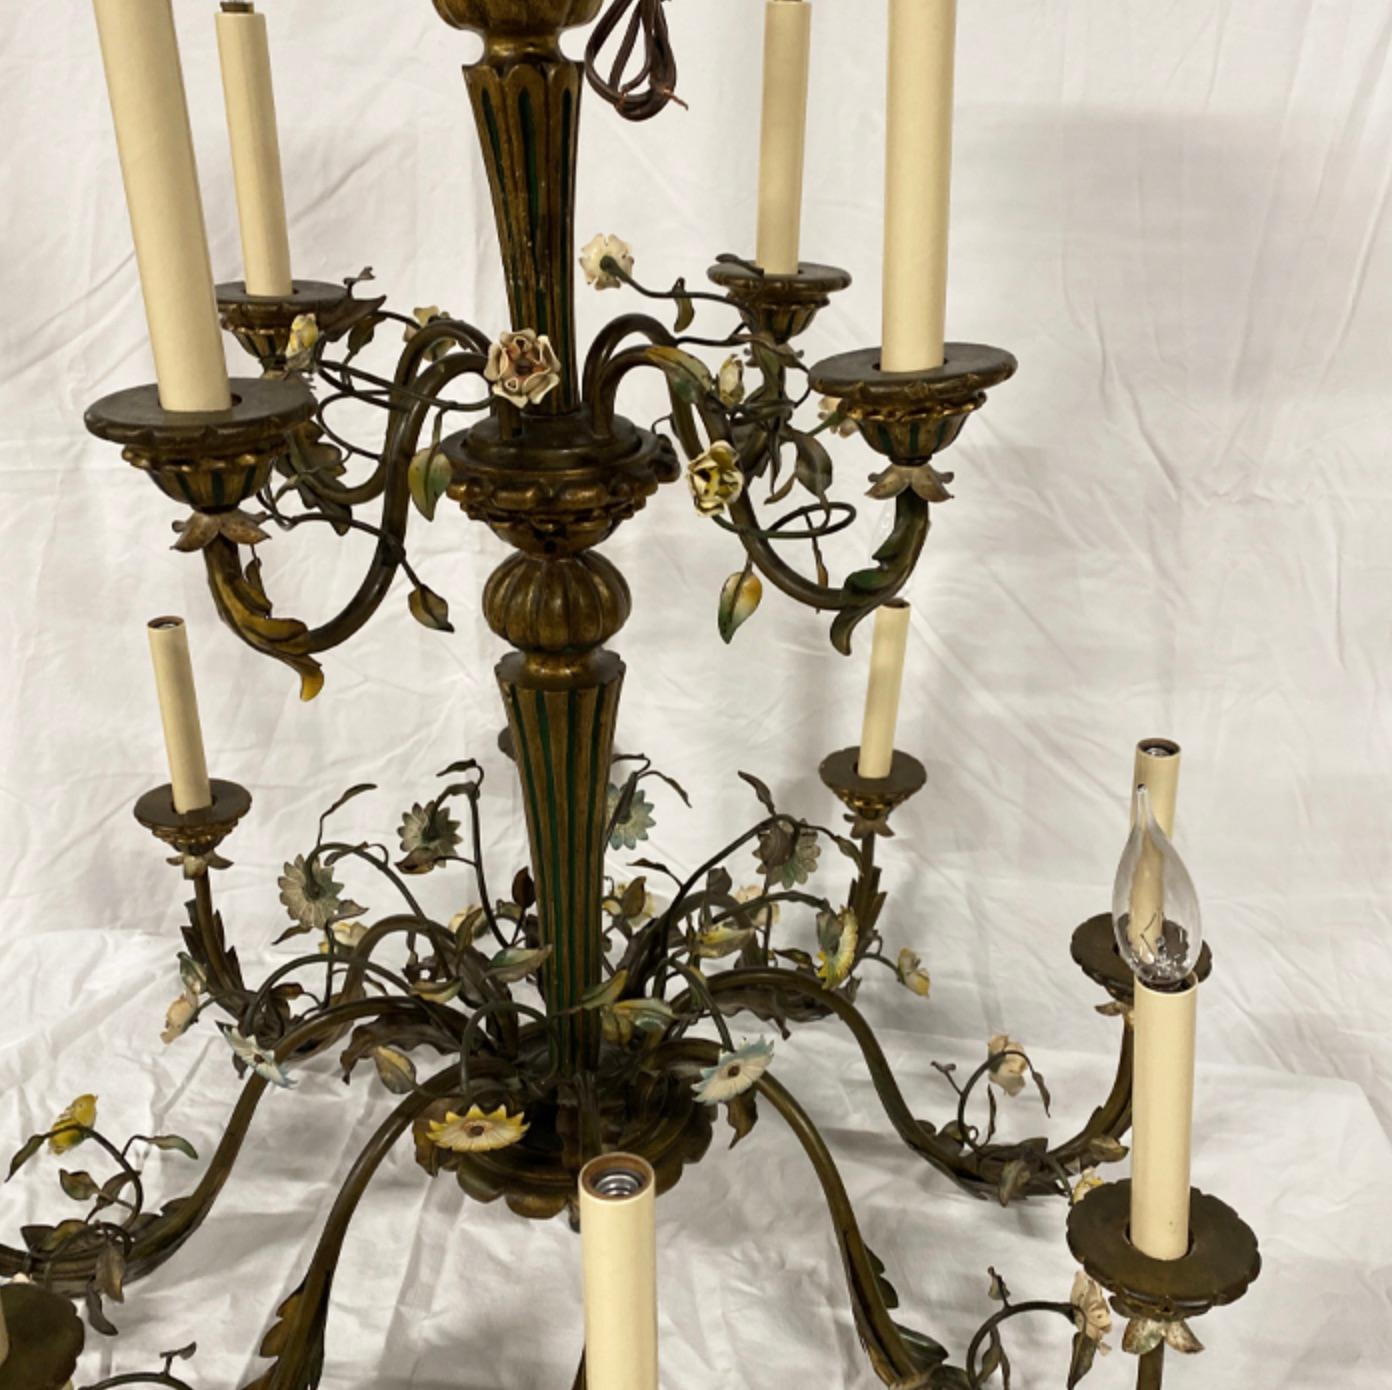 Daisy Chandelier

A large painted tole chandelier with foliage and floral motif on the body. 12-light.